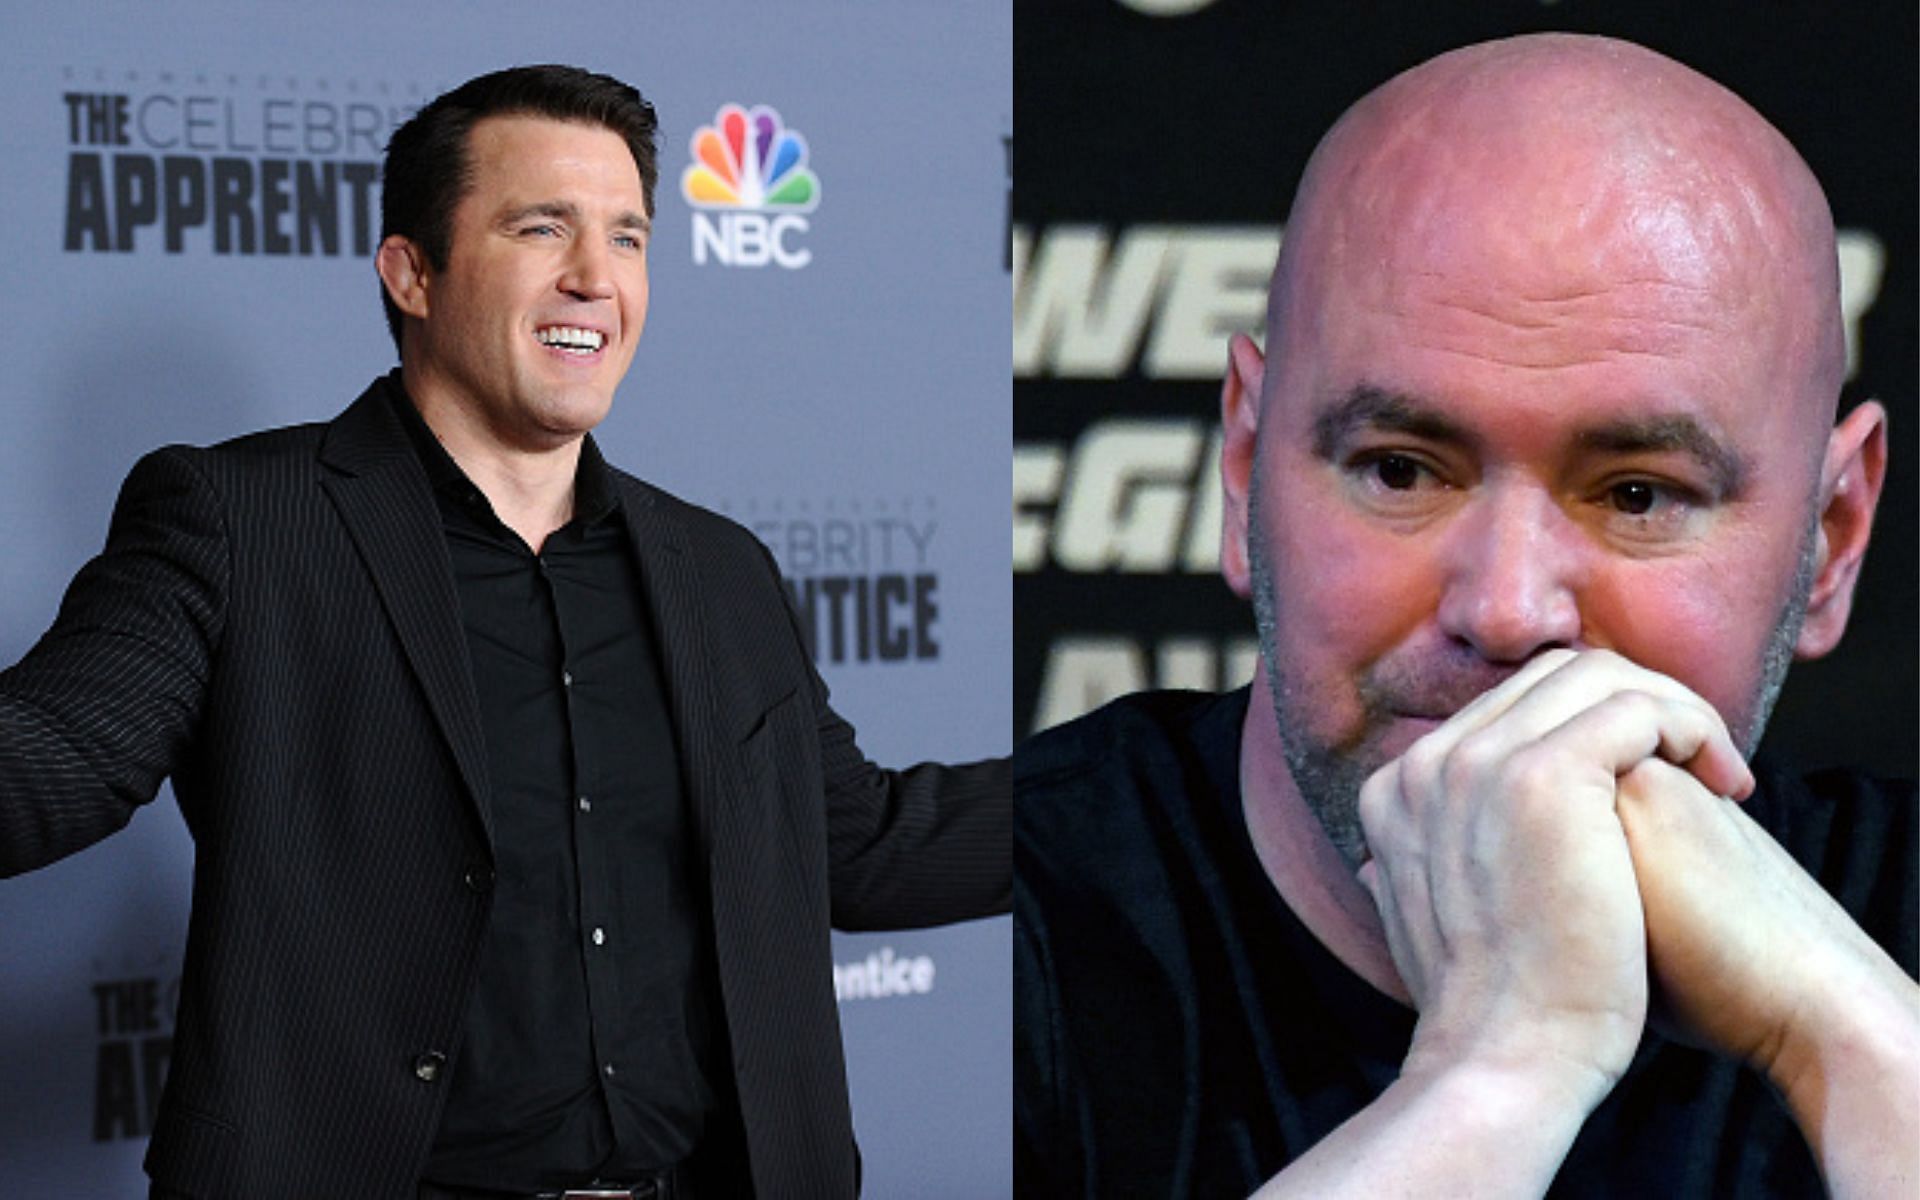 Chael Sonnen (left) and Dana White (right)(Images via Getty)